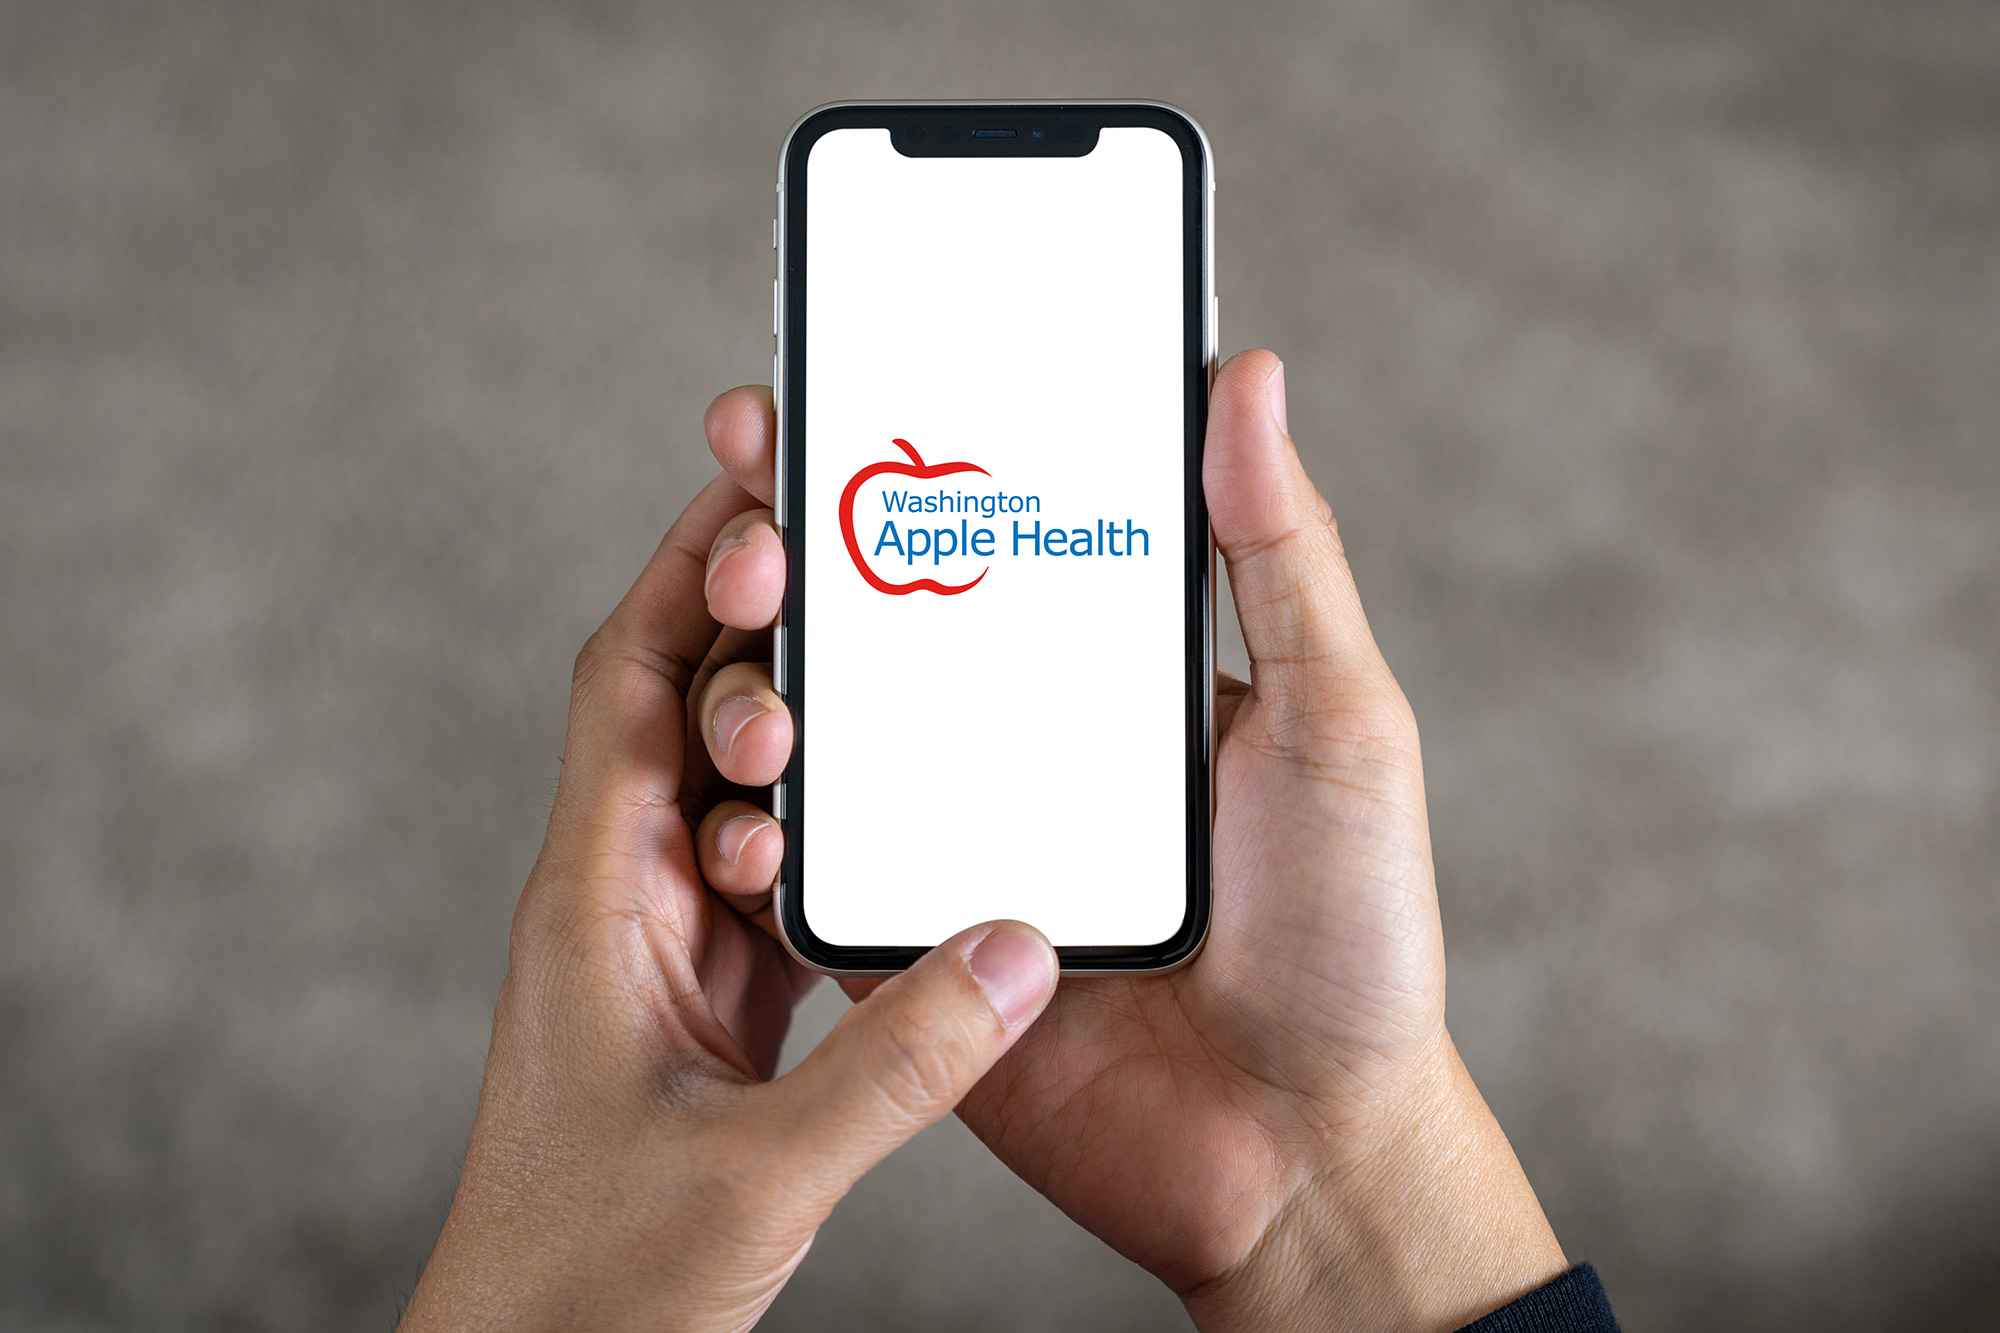 Top-down view of hands holding a smartphone with the Apple Health logo